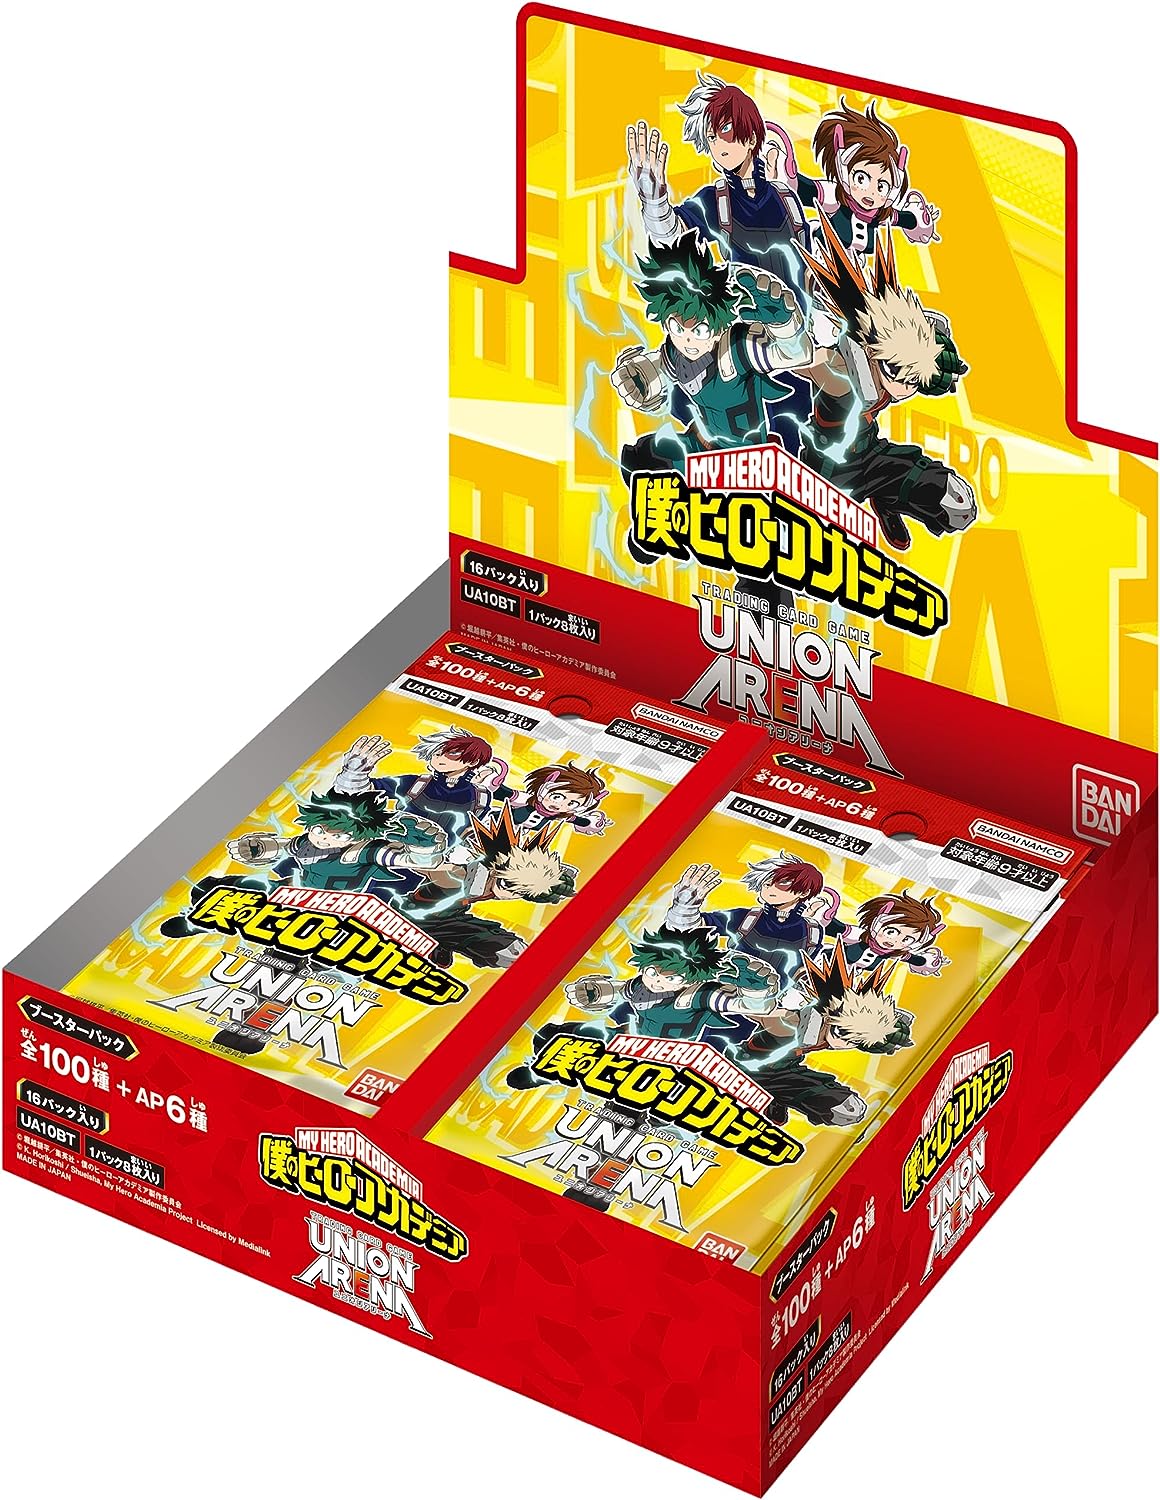 UNION ARENA - My Hero Academia Booster Pack Box (16pack)